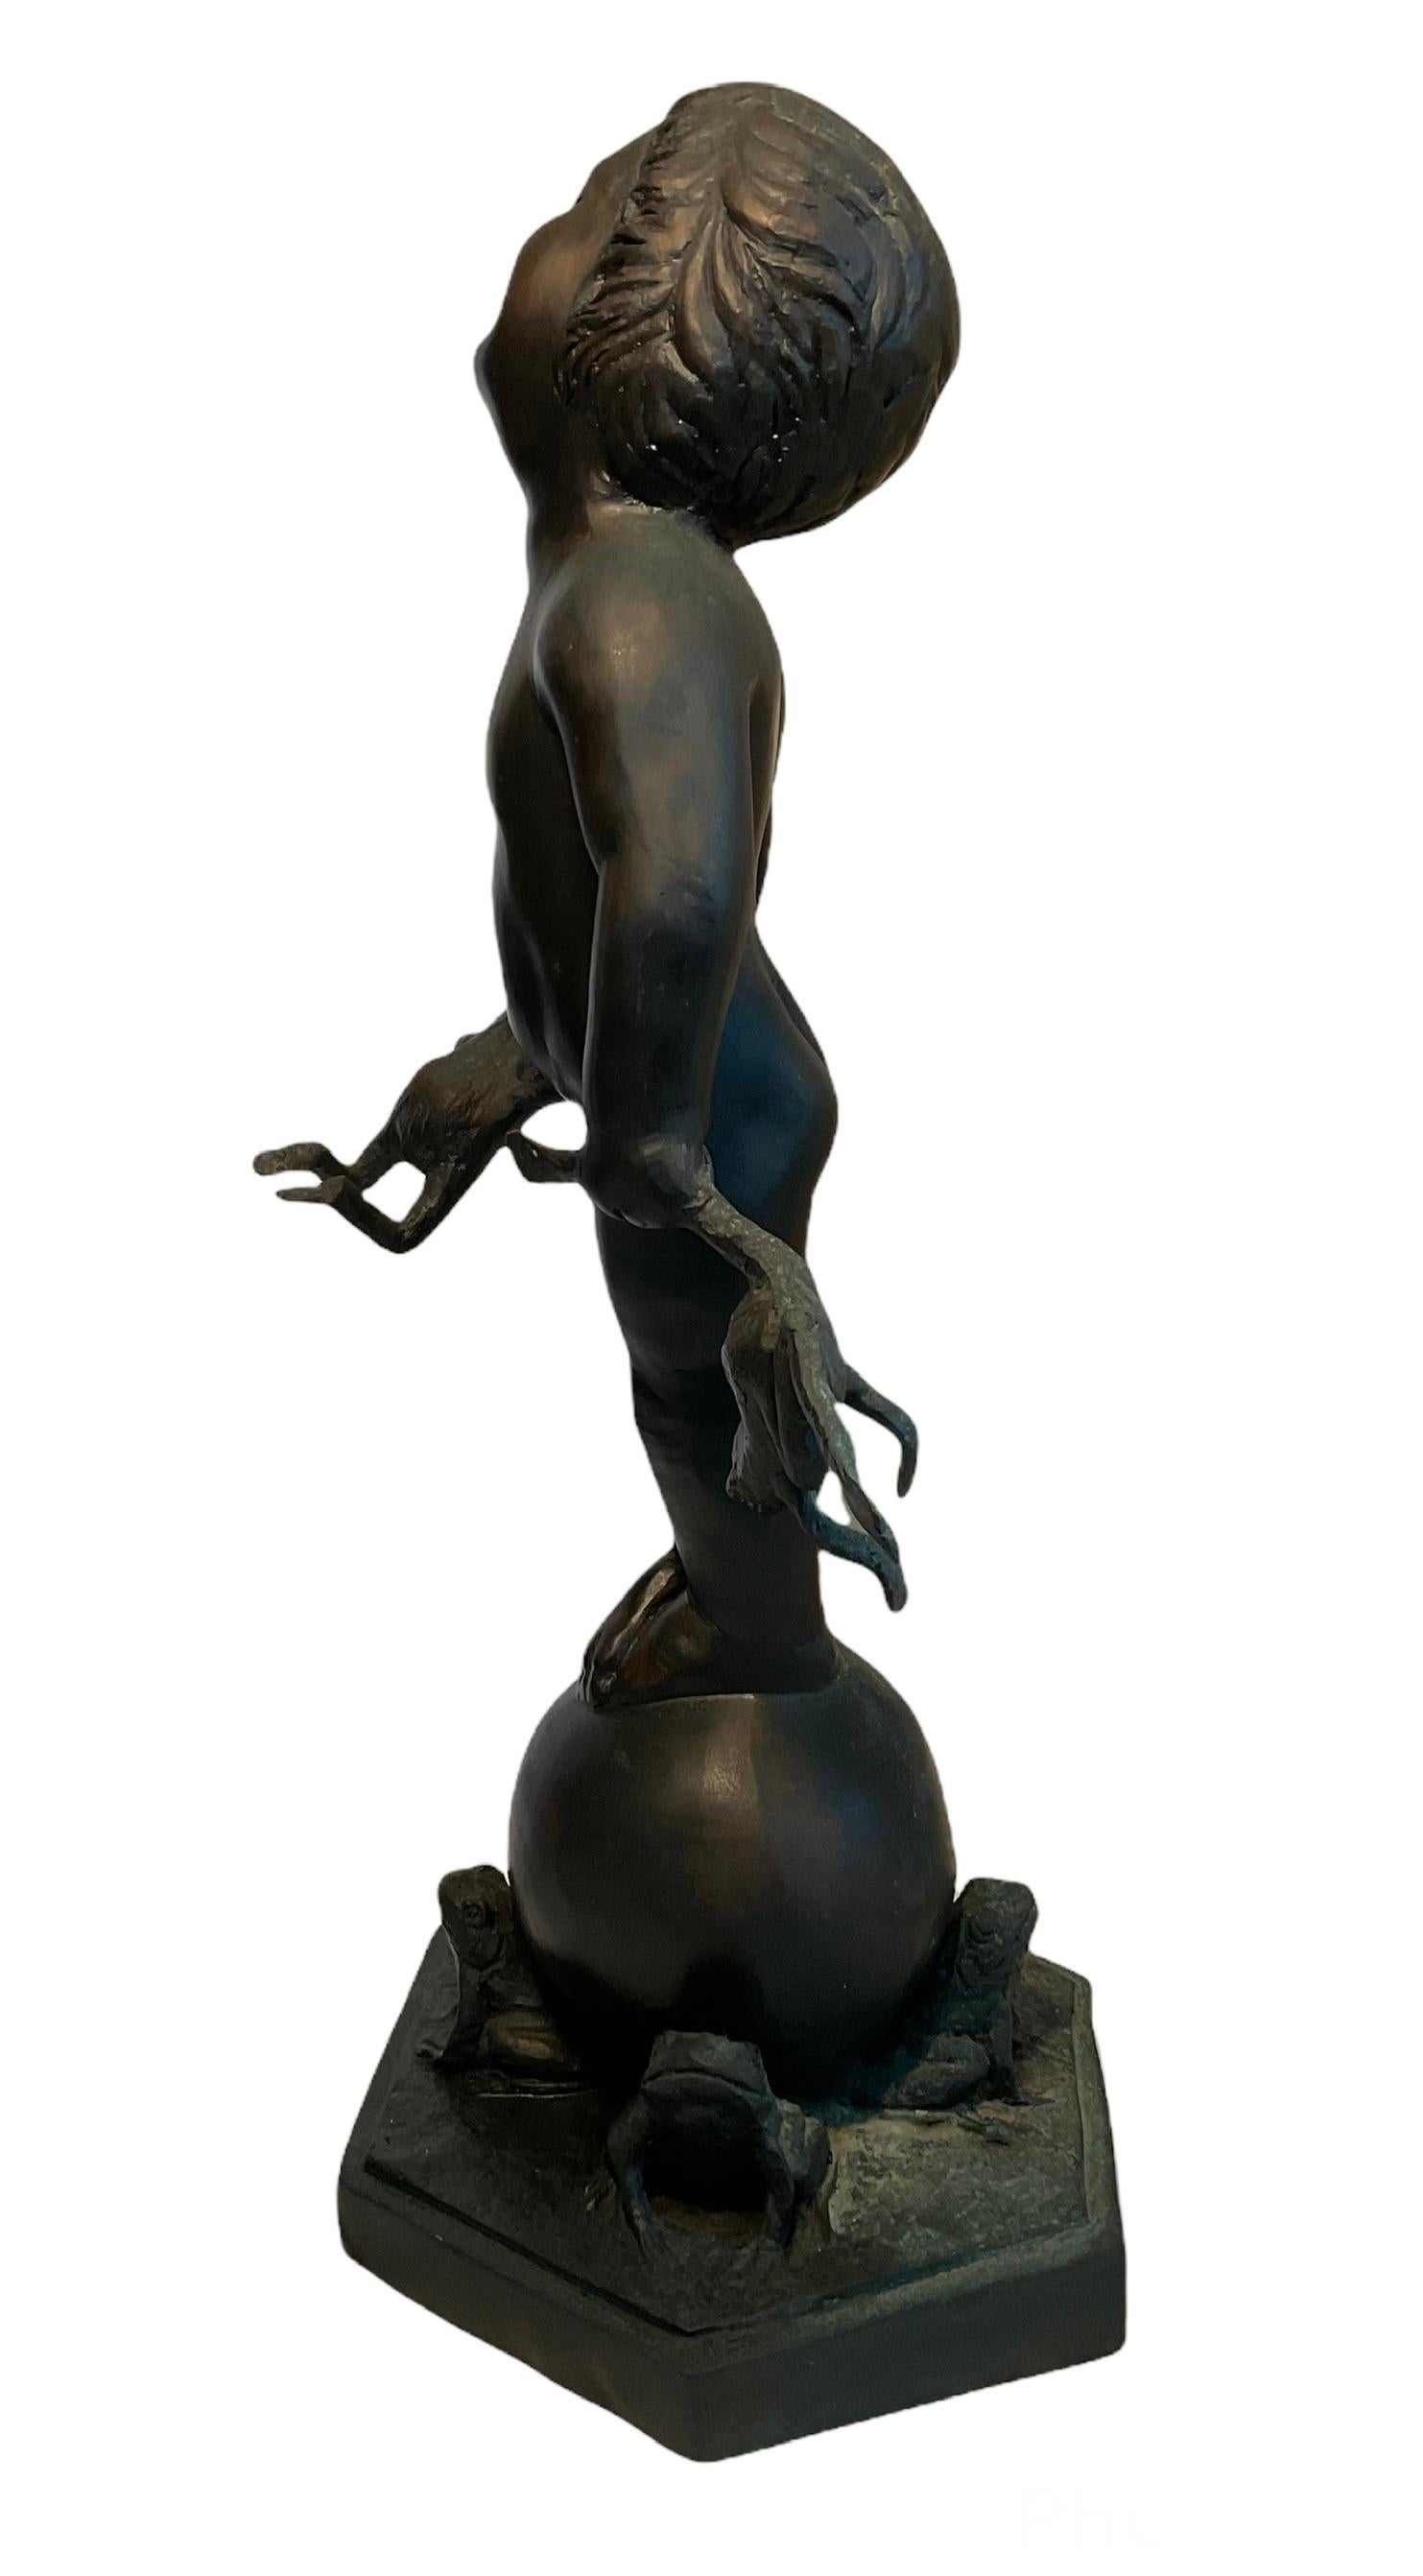 This is a heavy patinated bronze sculpture after Edith Barreto Parsons- The Laughing Frog Baby sculpture. It depicts a joyful nude child girl who is standing up in a sphere surrounded by frogs that are not attached to the base. She is also holding a